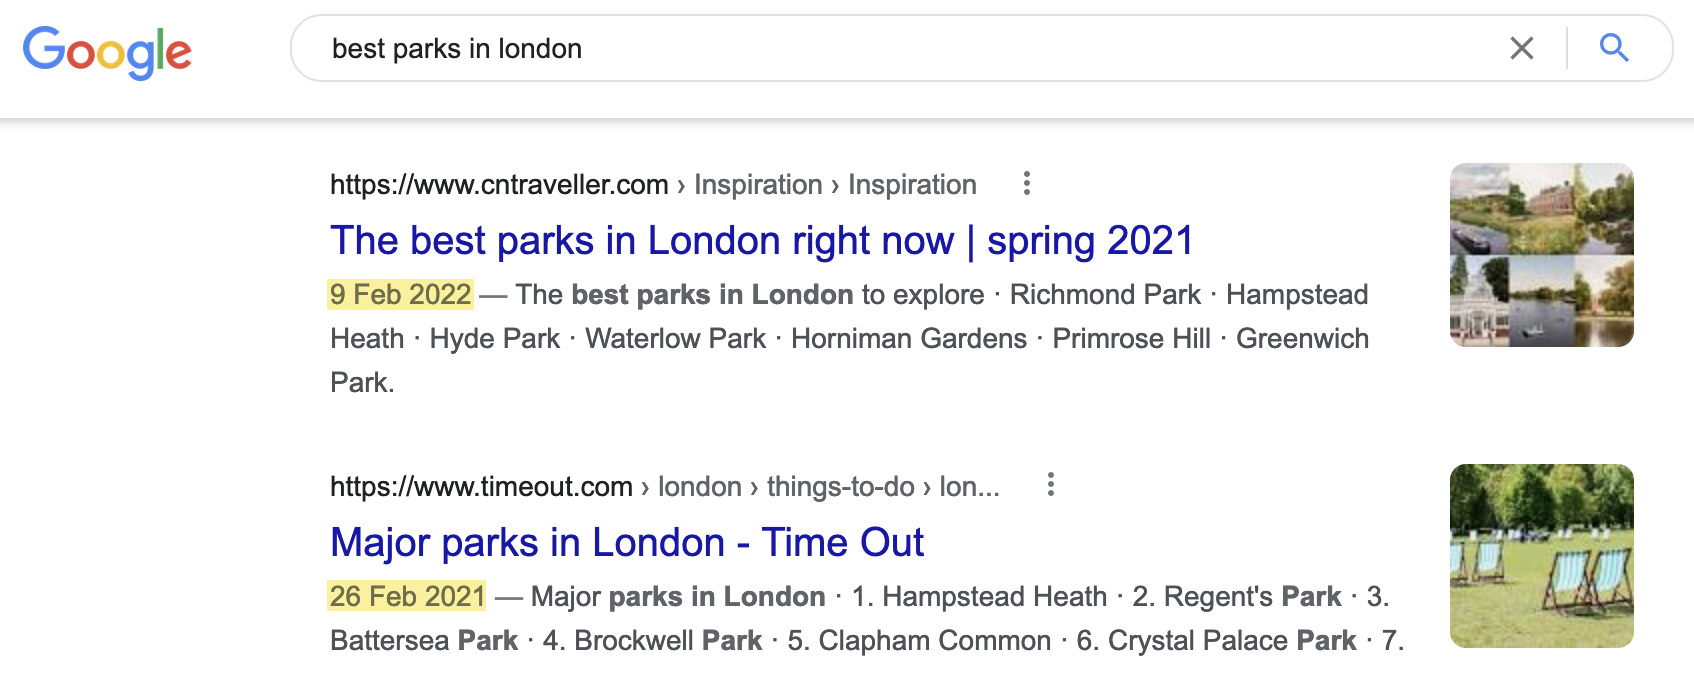 The results for "best parks in london" aren't particularly fresh
